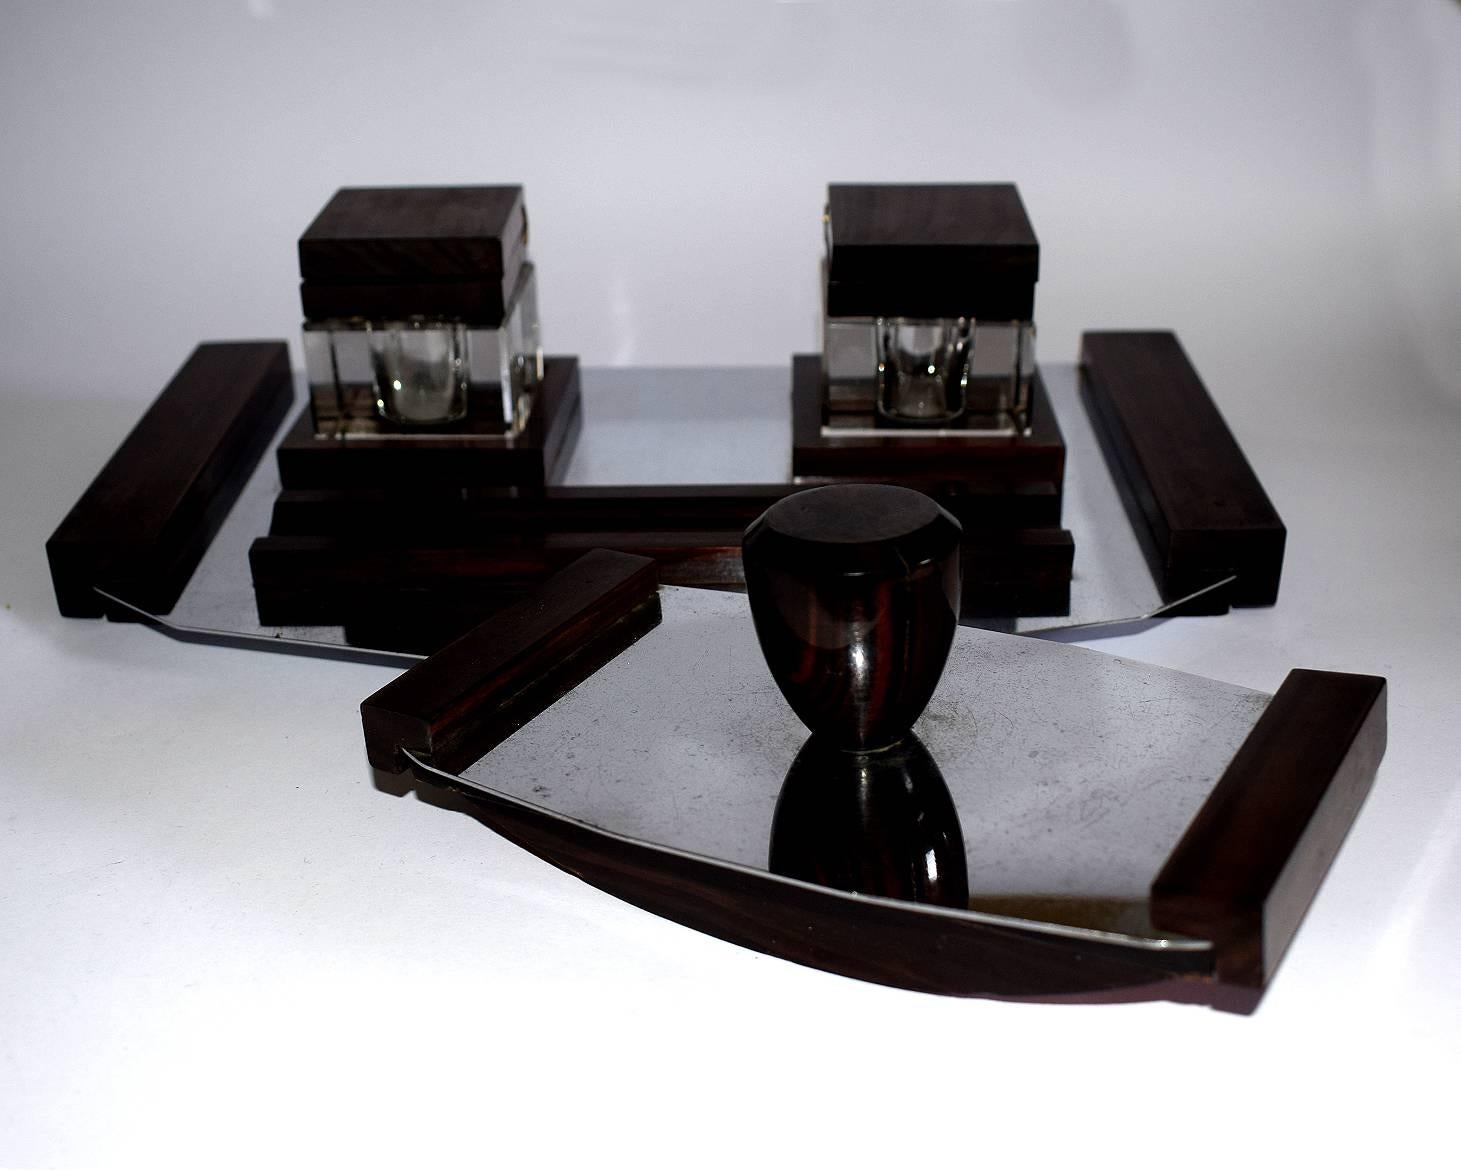 Originating from France this superb 1930s Art Deco desk set comprises a blotter and a freestanding tray which holds two inkwells, and a pen tray. The whole piece is adorned with Massacre ebony wood accents. This desk set has man cave written